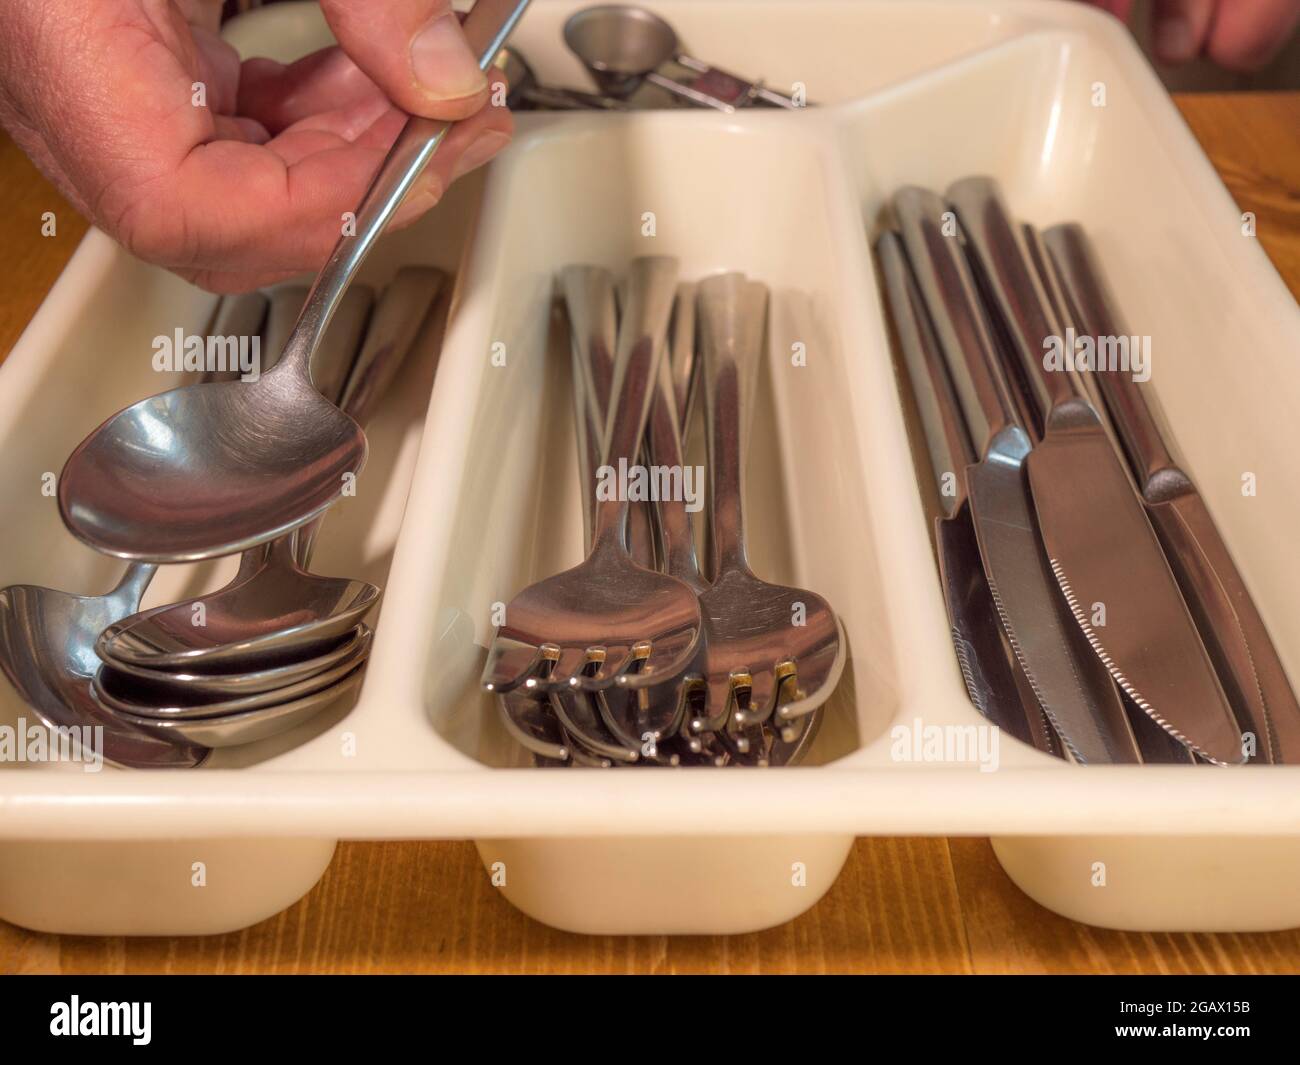 Closeup POV shot of a man’s hand placing a spoon on top of others in a plastic cutlery tray, with compartments for steel knives, forks and spoons. Stock Photo